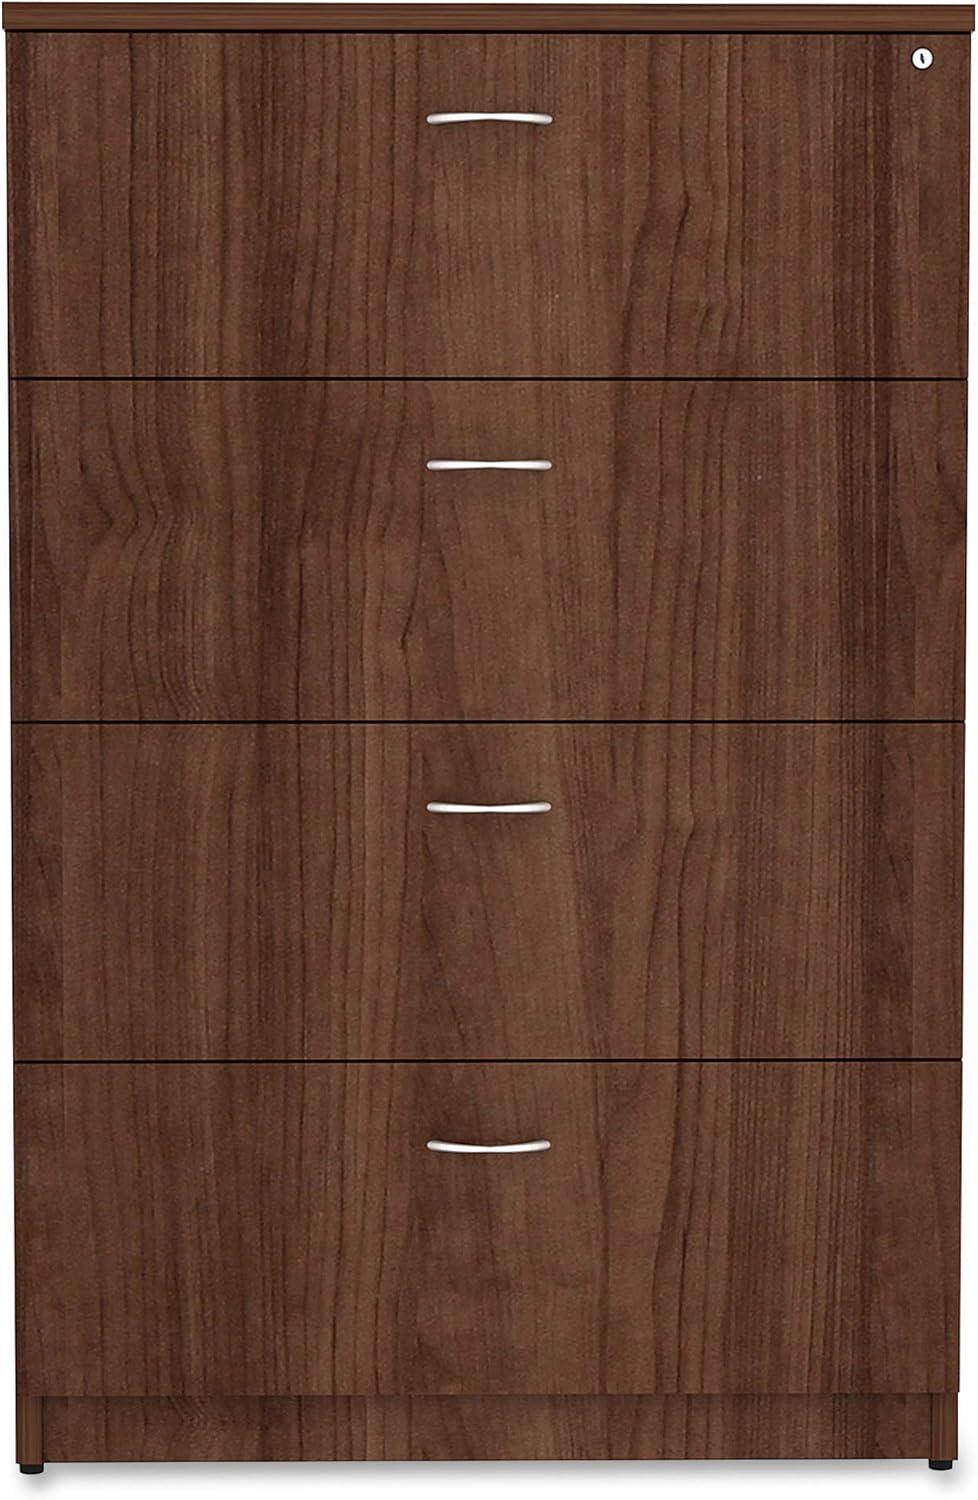 Walnut 4-Drawer Lateral Legal File Cabinet with Central Lock